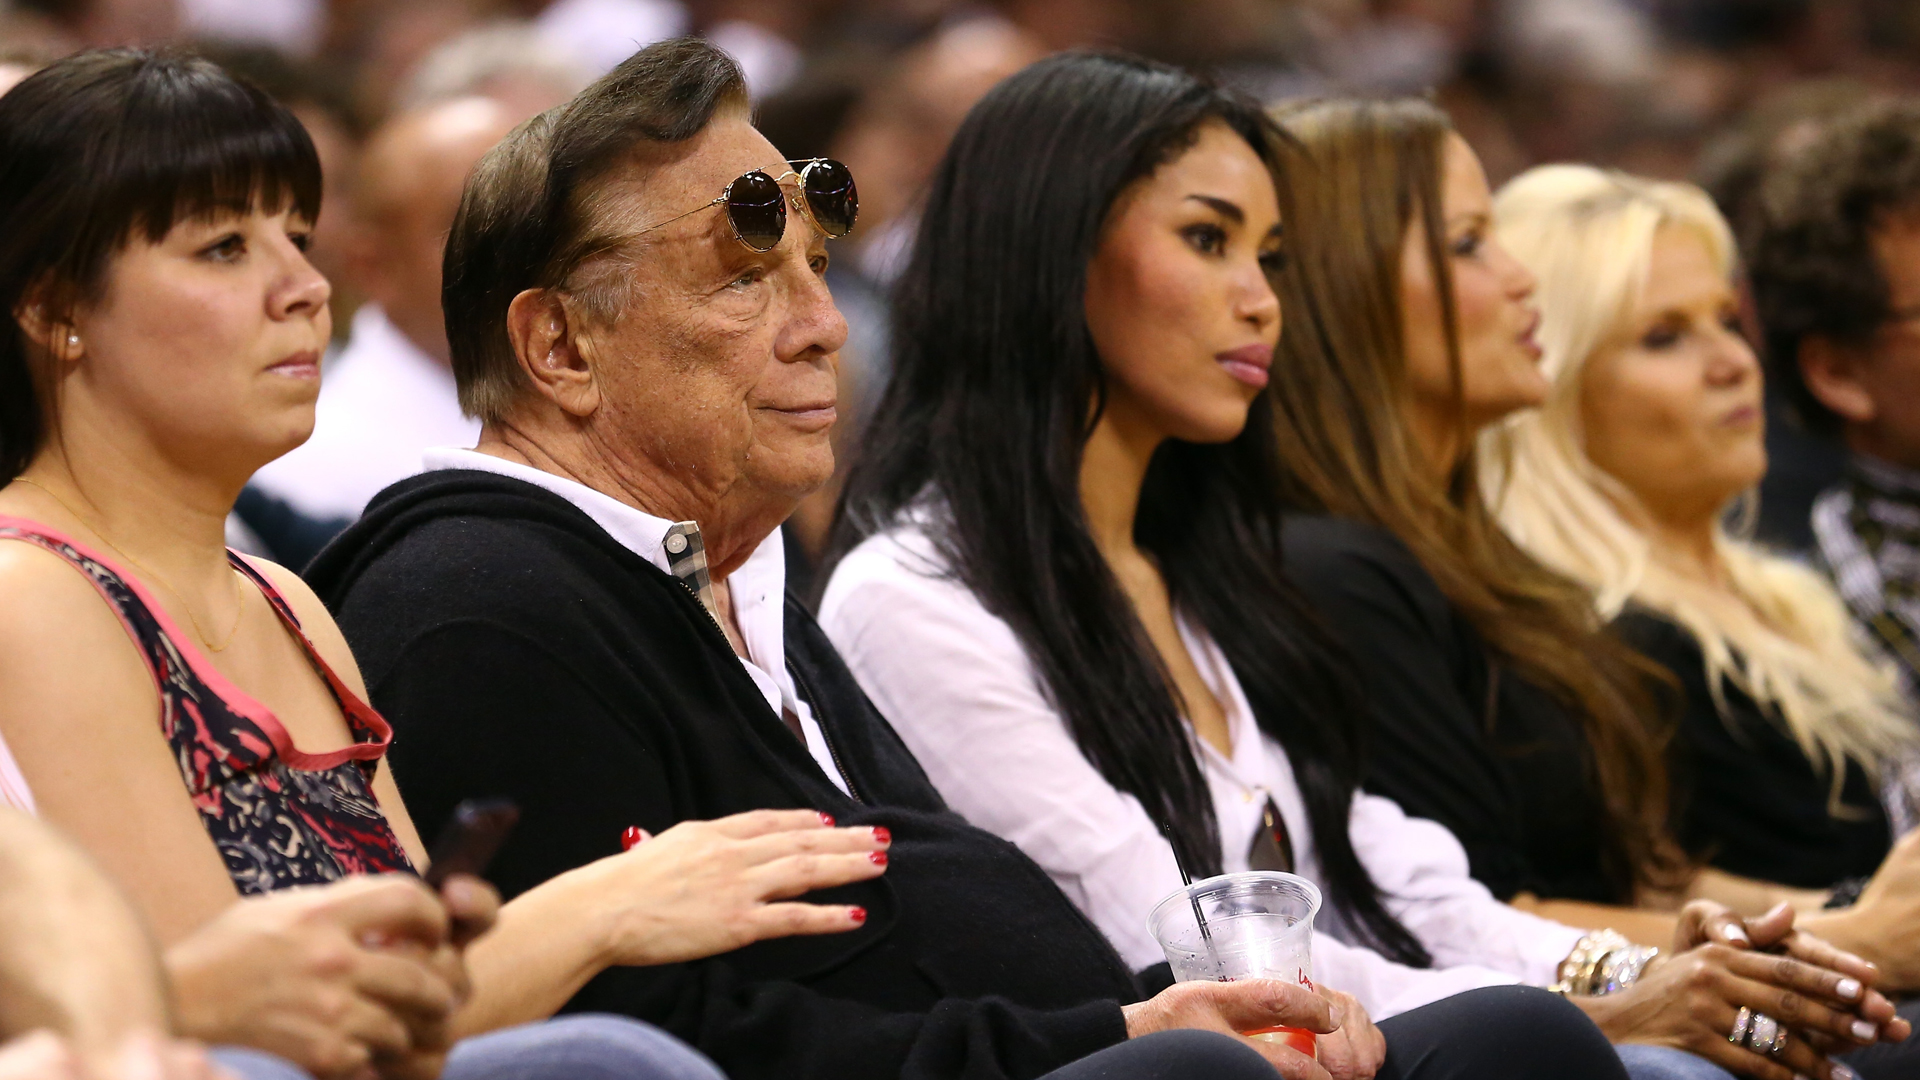 A culture of drive-bys and Christian assassins: What we can learn from the Donald Sterling and Jars of Clay fiascos